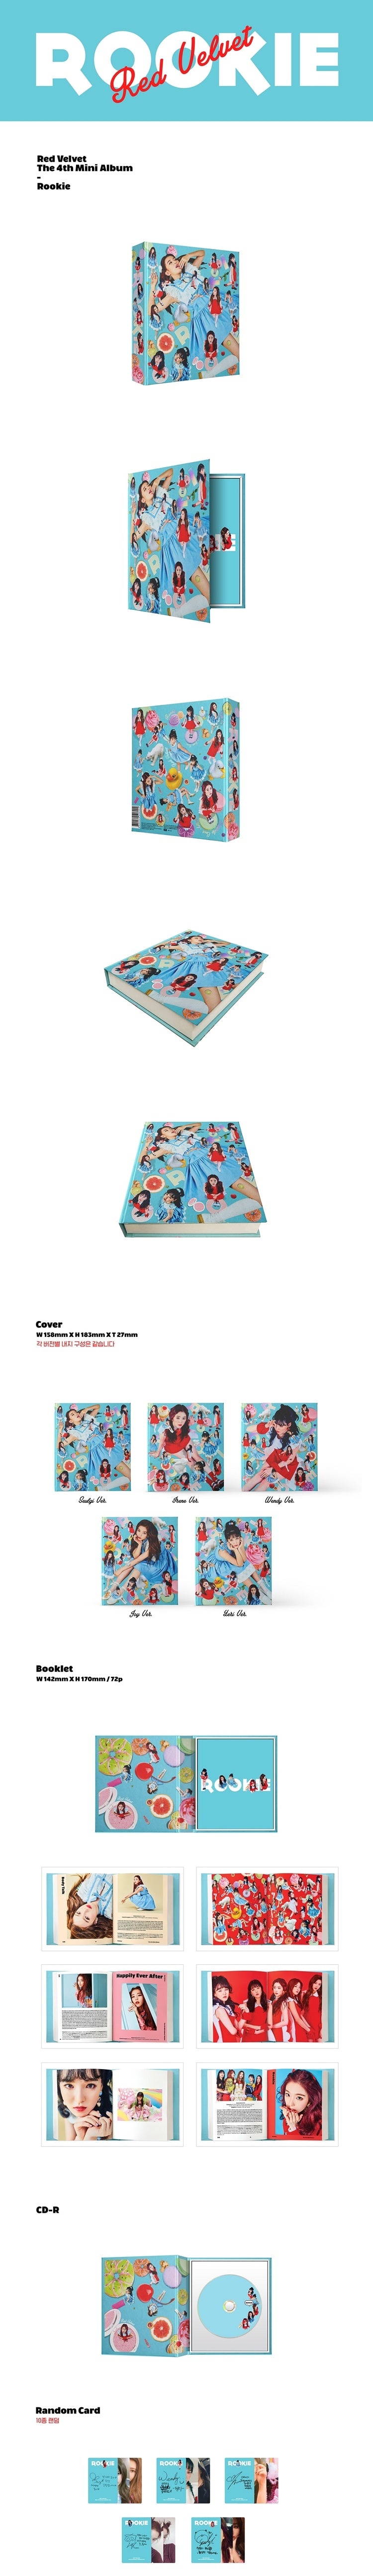 Express comeback Red Velvet, 2017 music industry rating notice! The 4th mini album 'Rookie', released on February 1st! Tre...